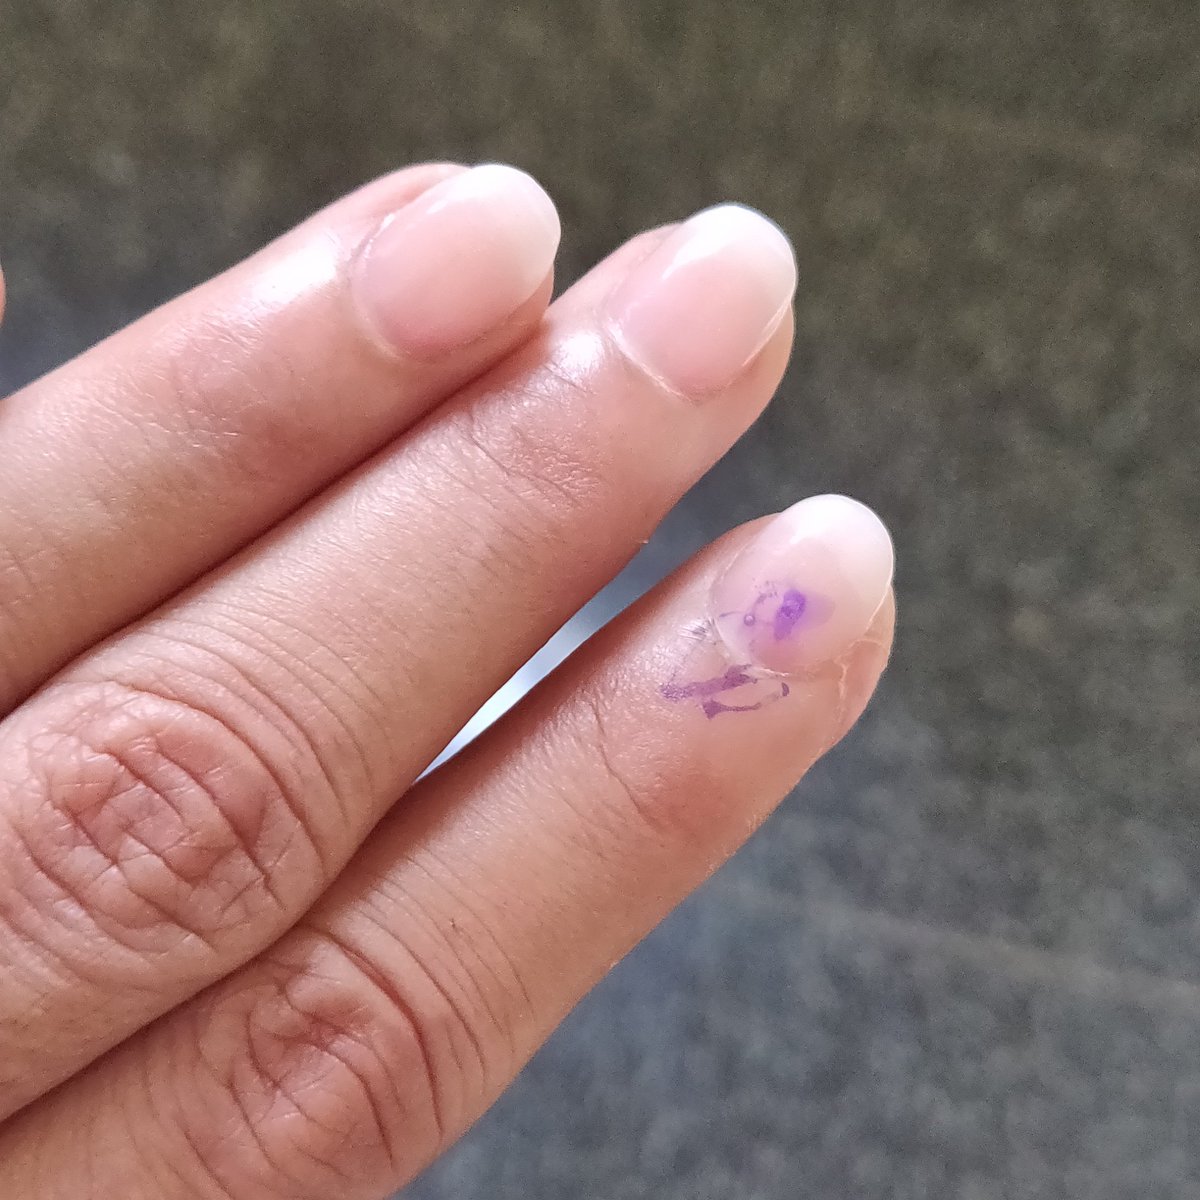 Dear Politician, I did my duty... It is time you do yours.
#indianpolitics #exerciseyourvote #Elections2019